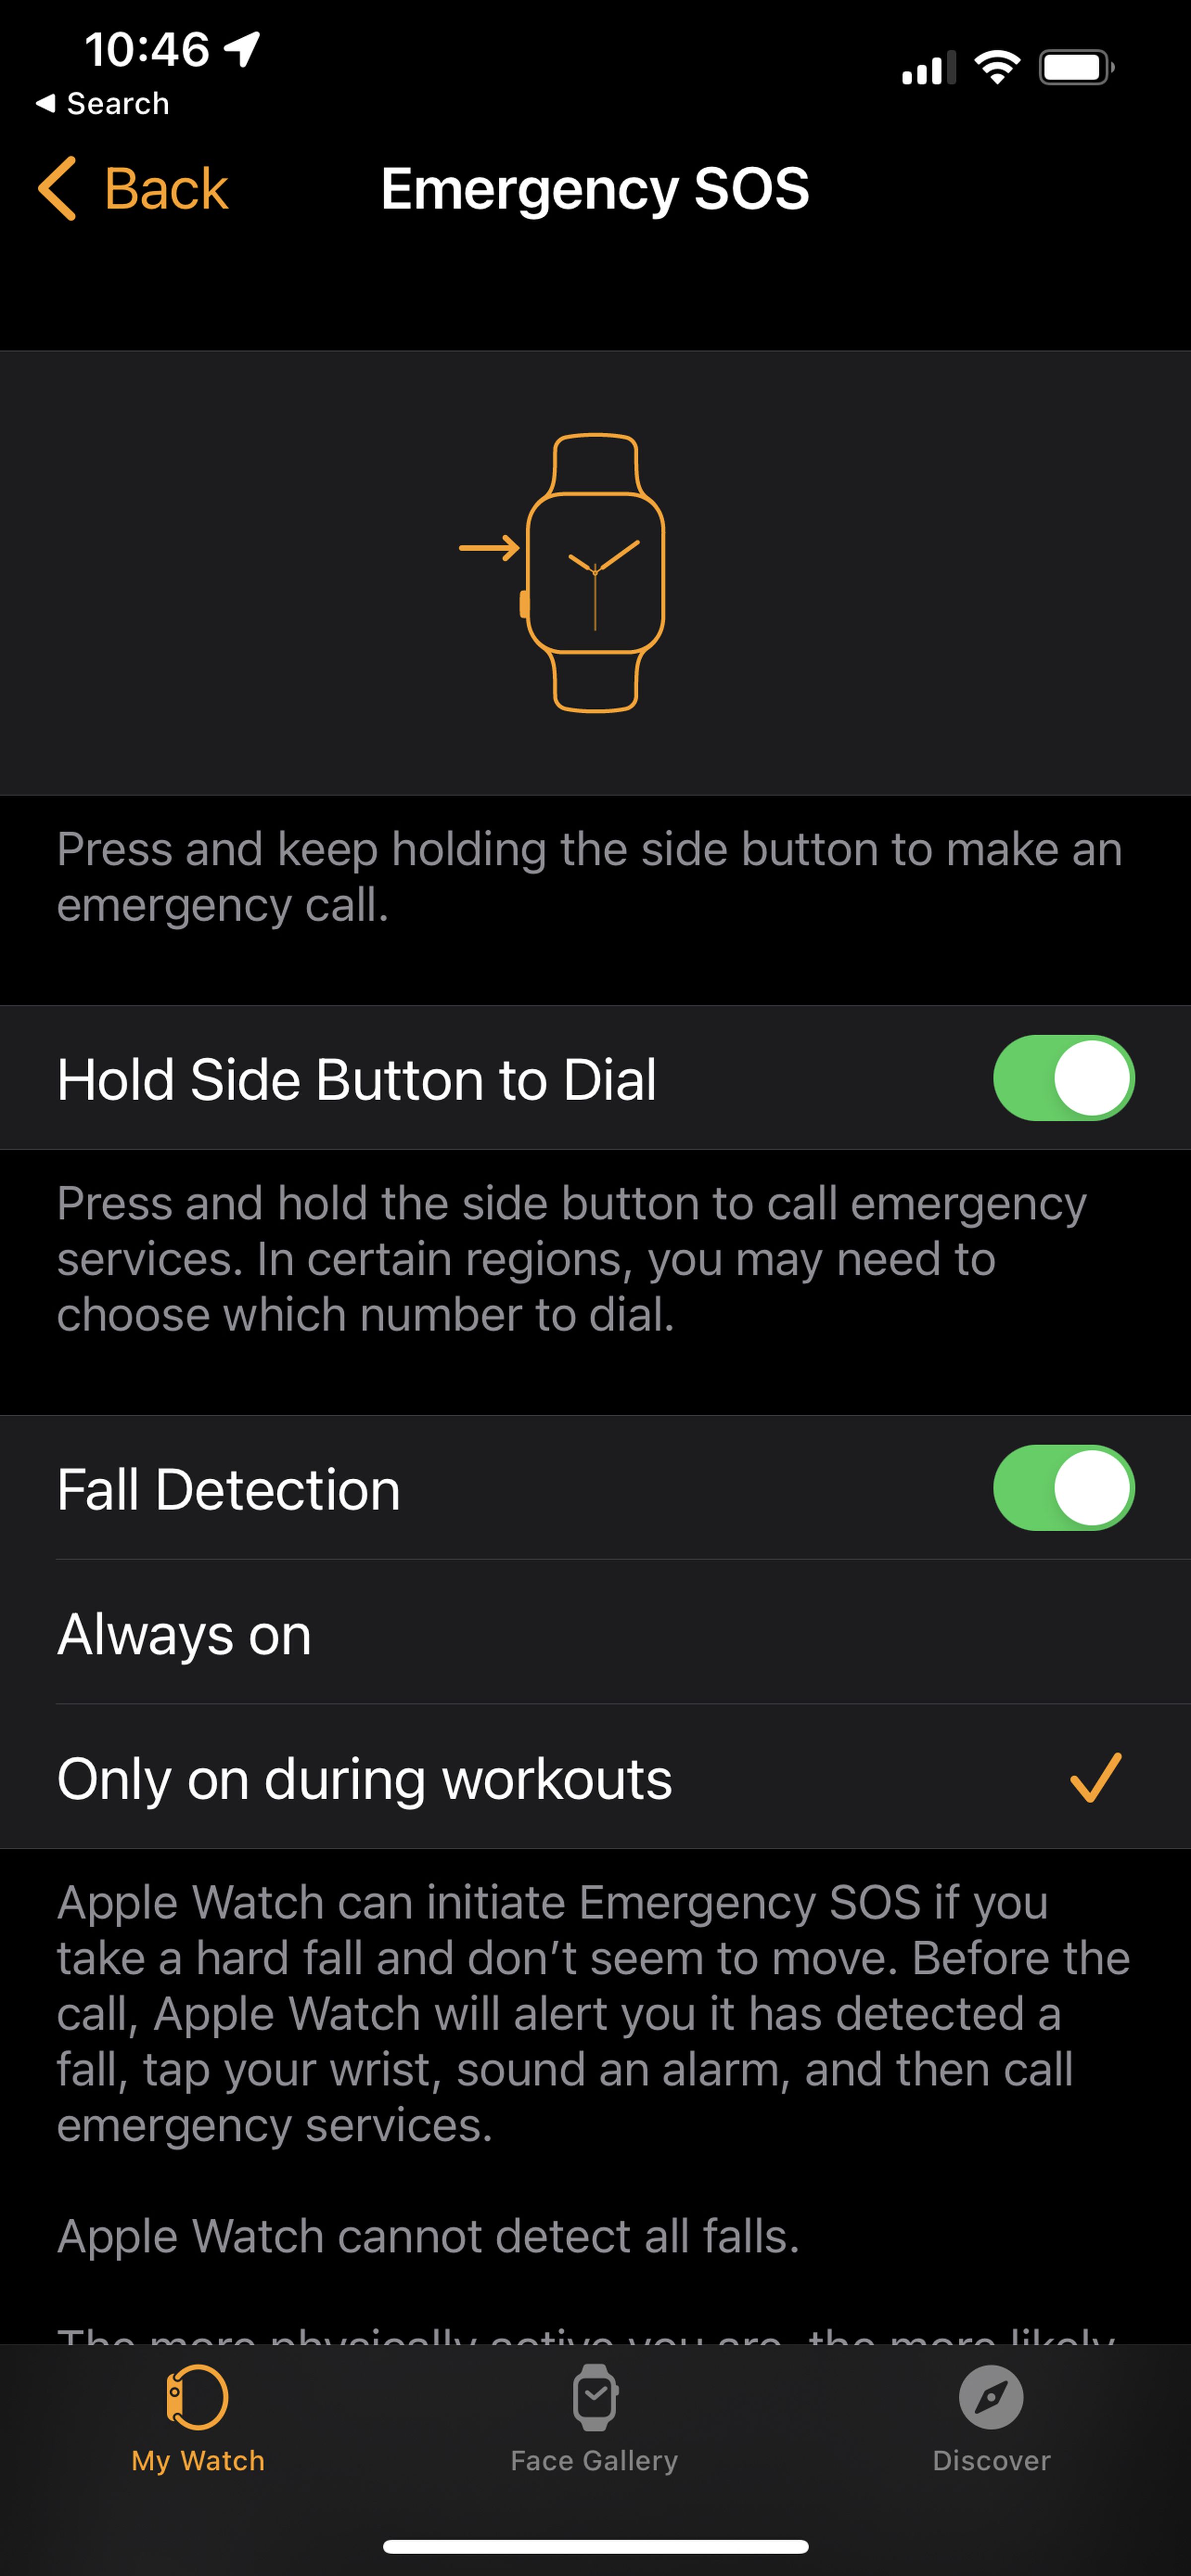 You can edit settings in the Watch app on your iPhone.